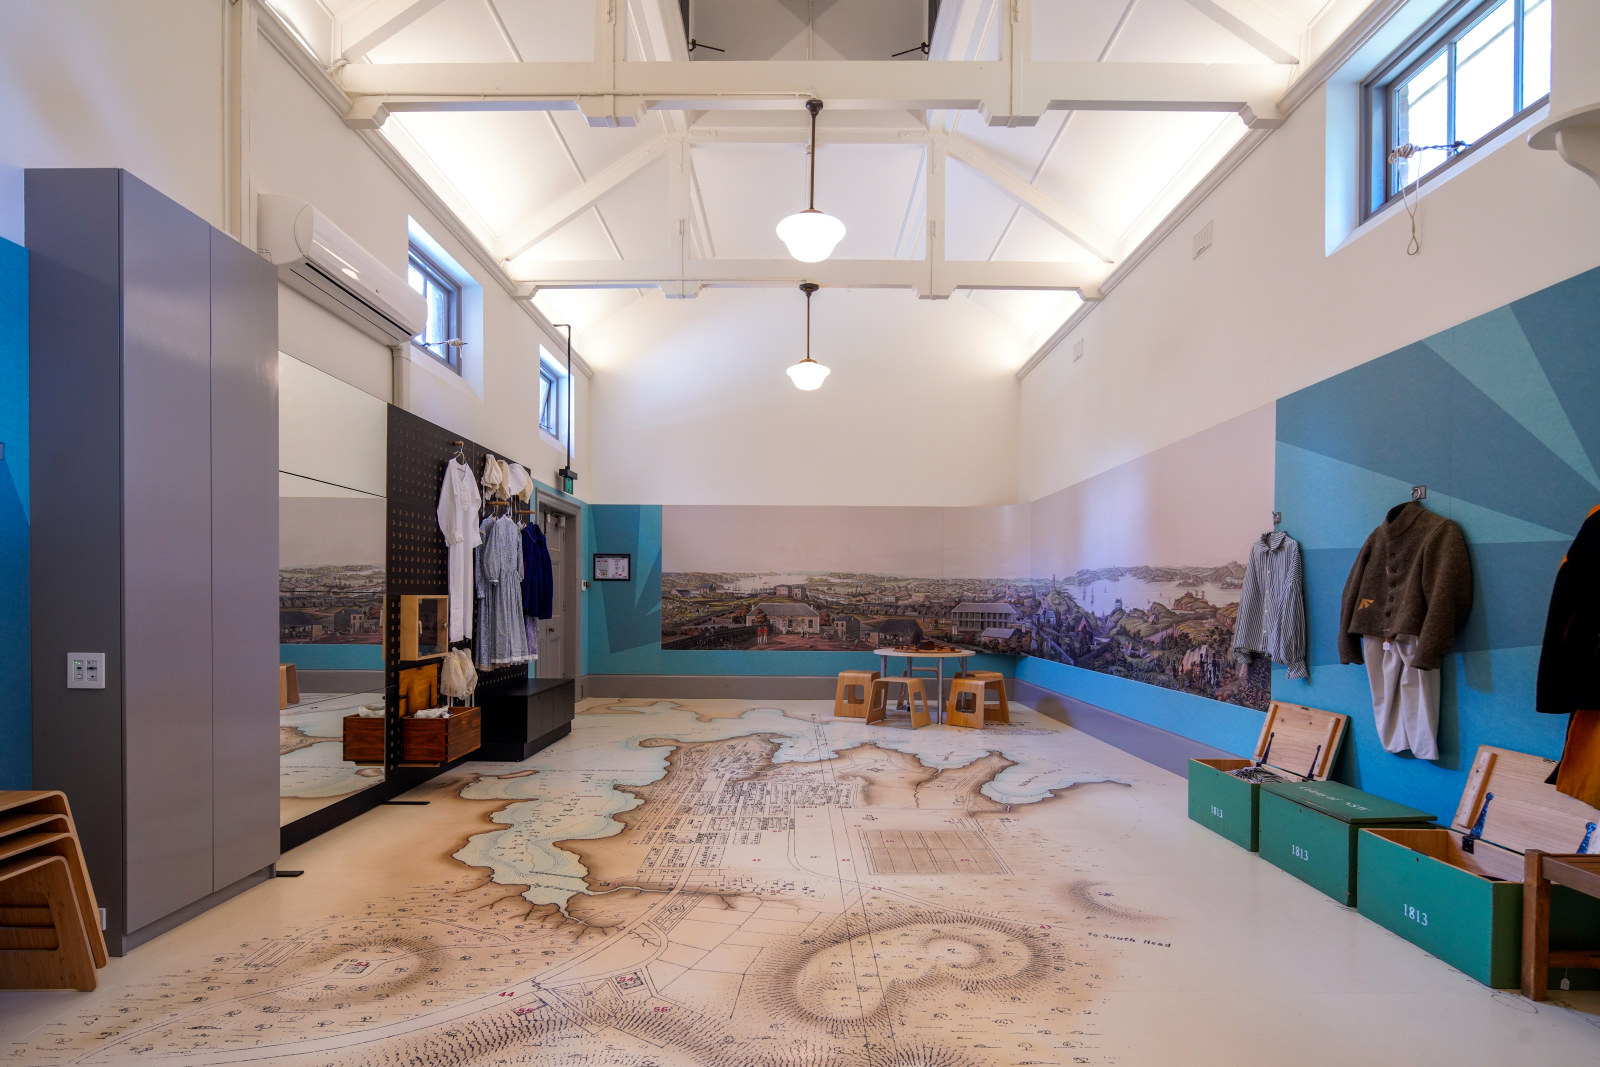 Installation view of Learning Precinct: Learning 1, located in North Range of Hyde Park Barracks.